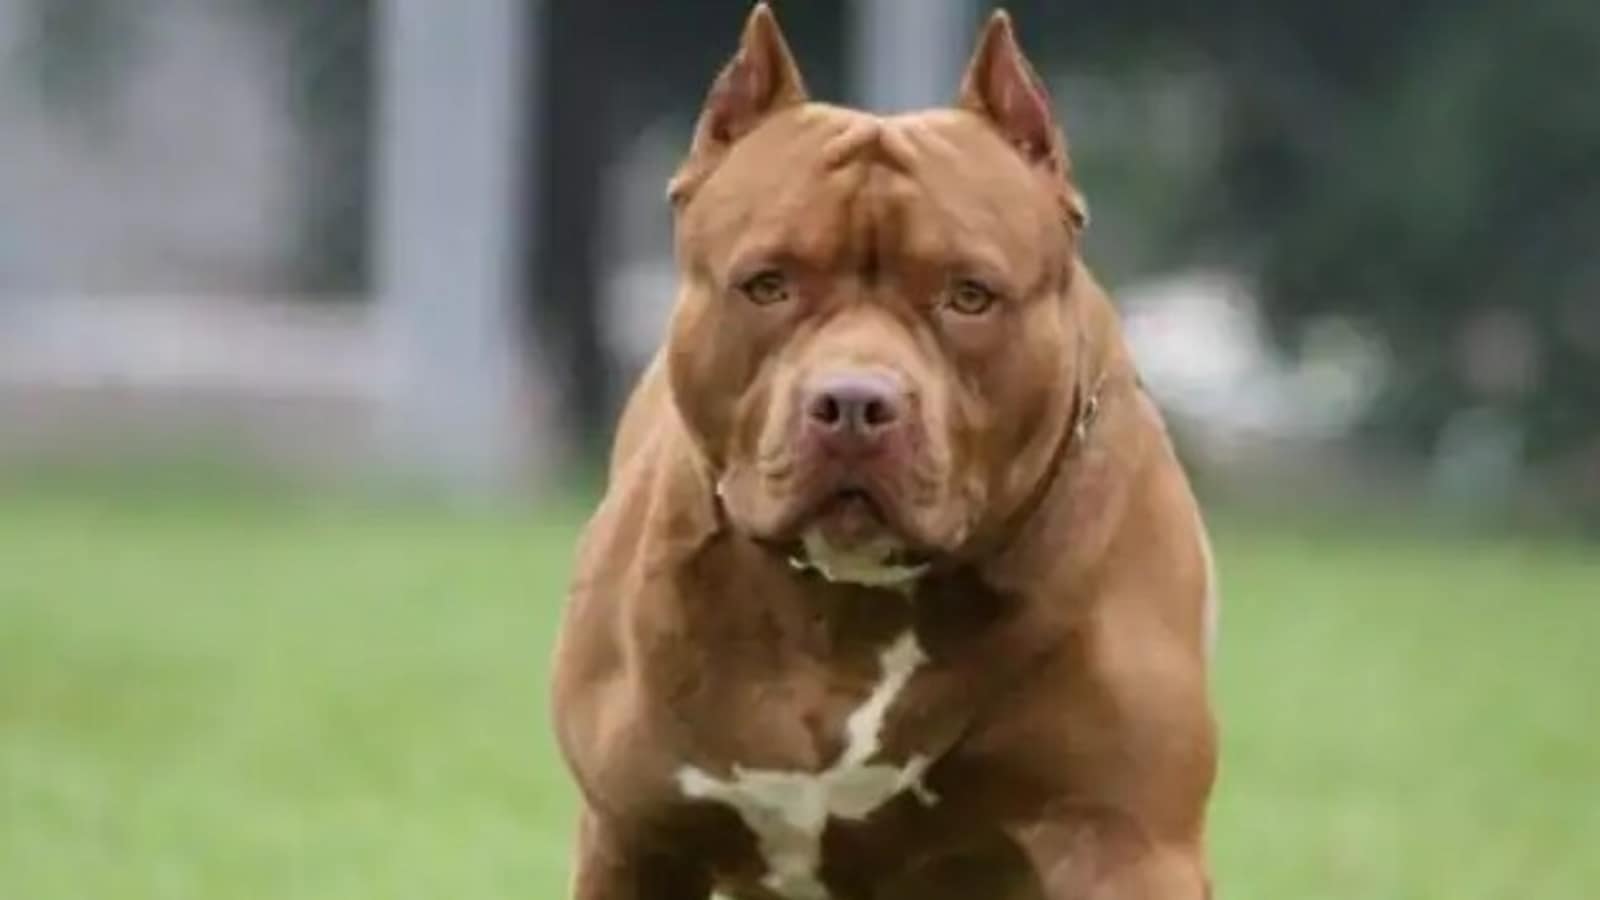 80-year-old Lucknow woman mauled to death by pitbull: Report ...